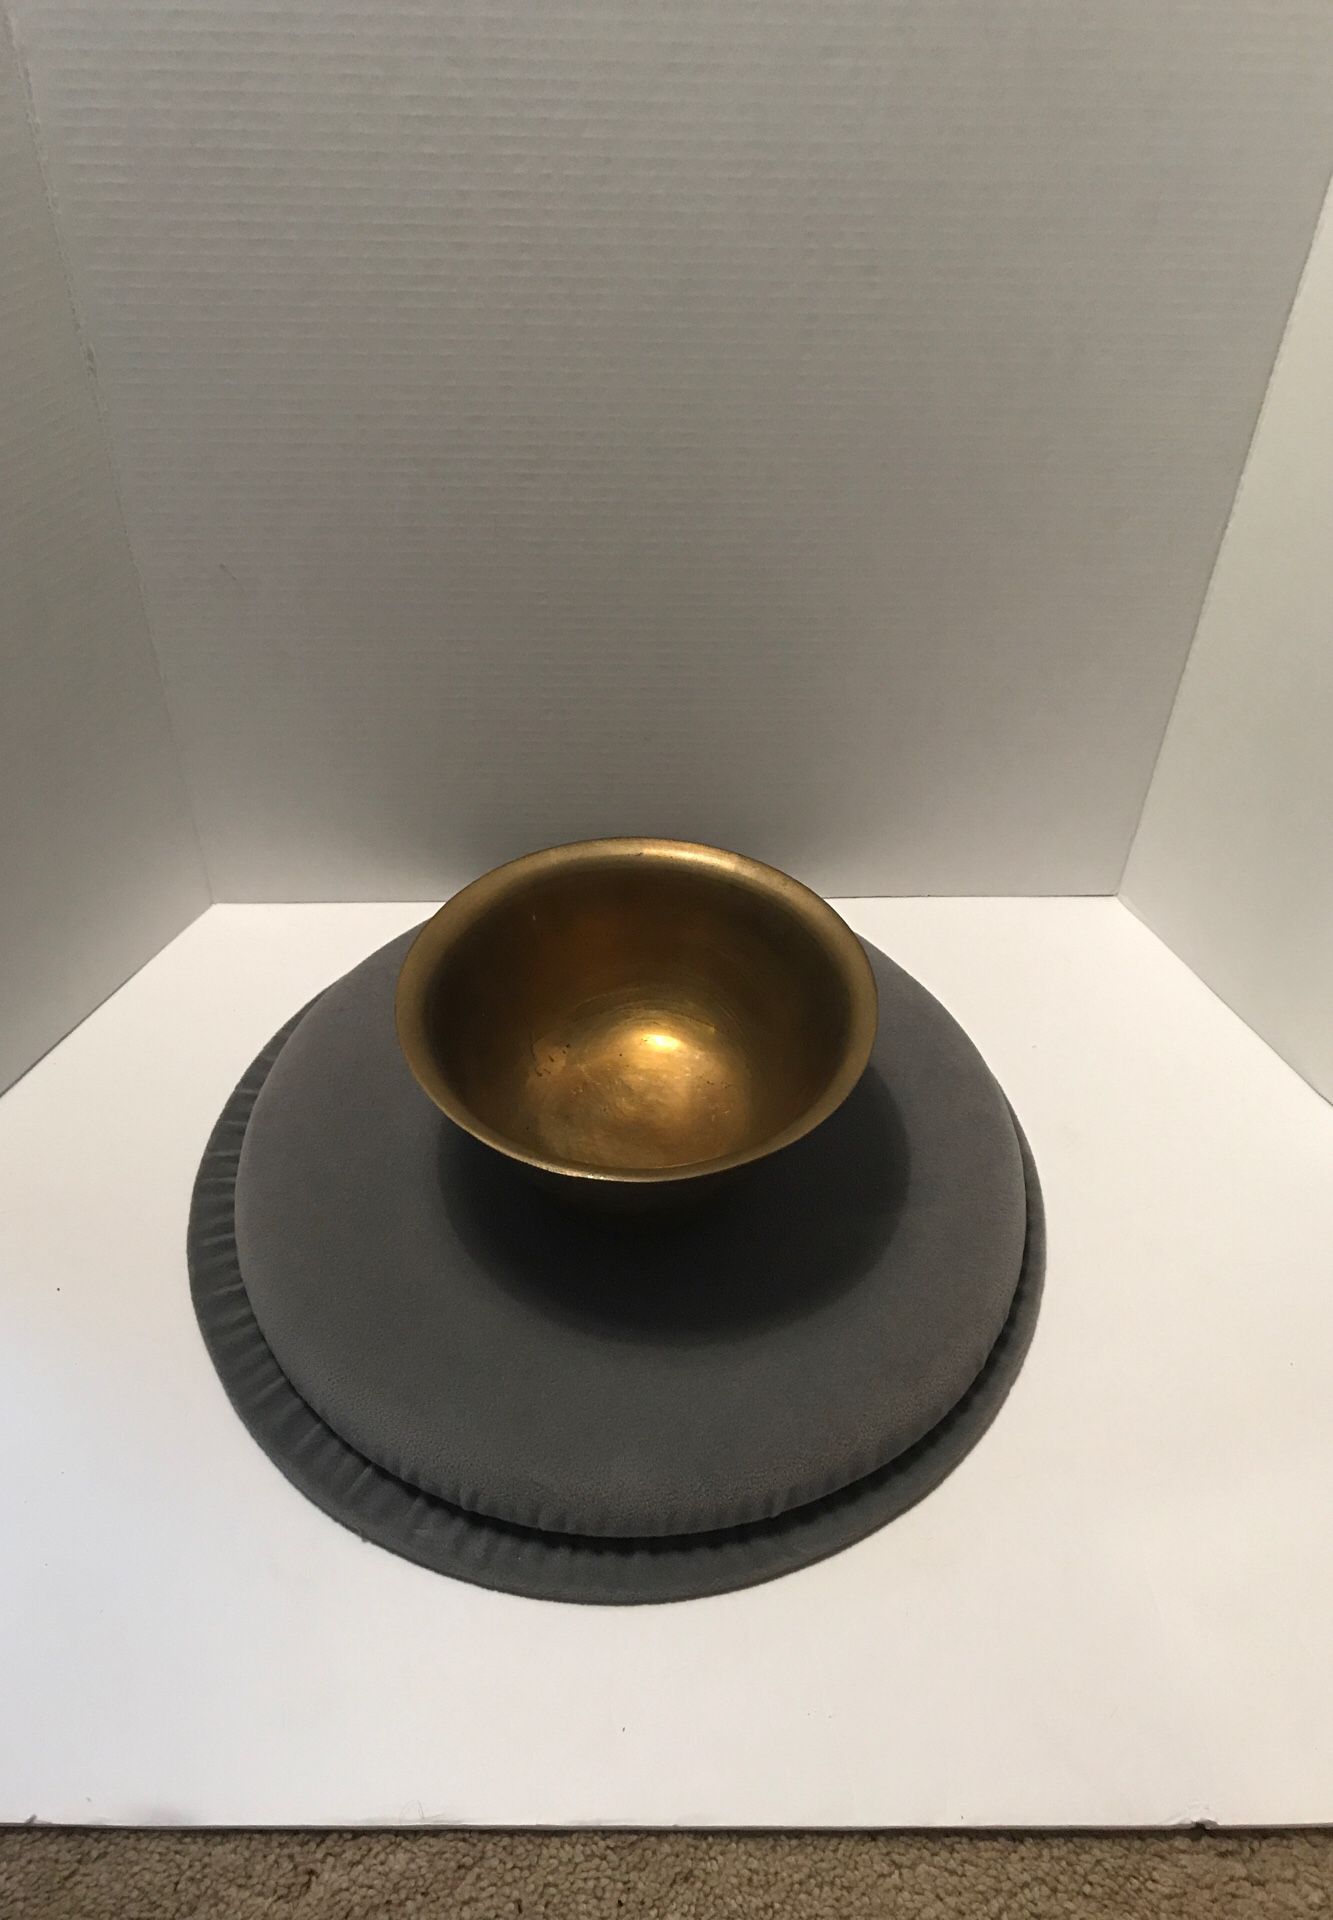 Antique brass bowl from China 20.00 obo